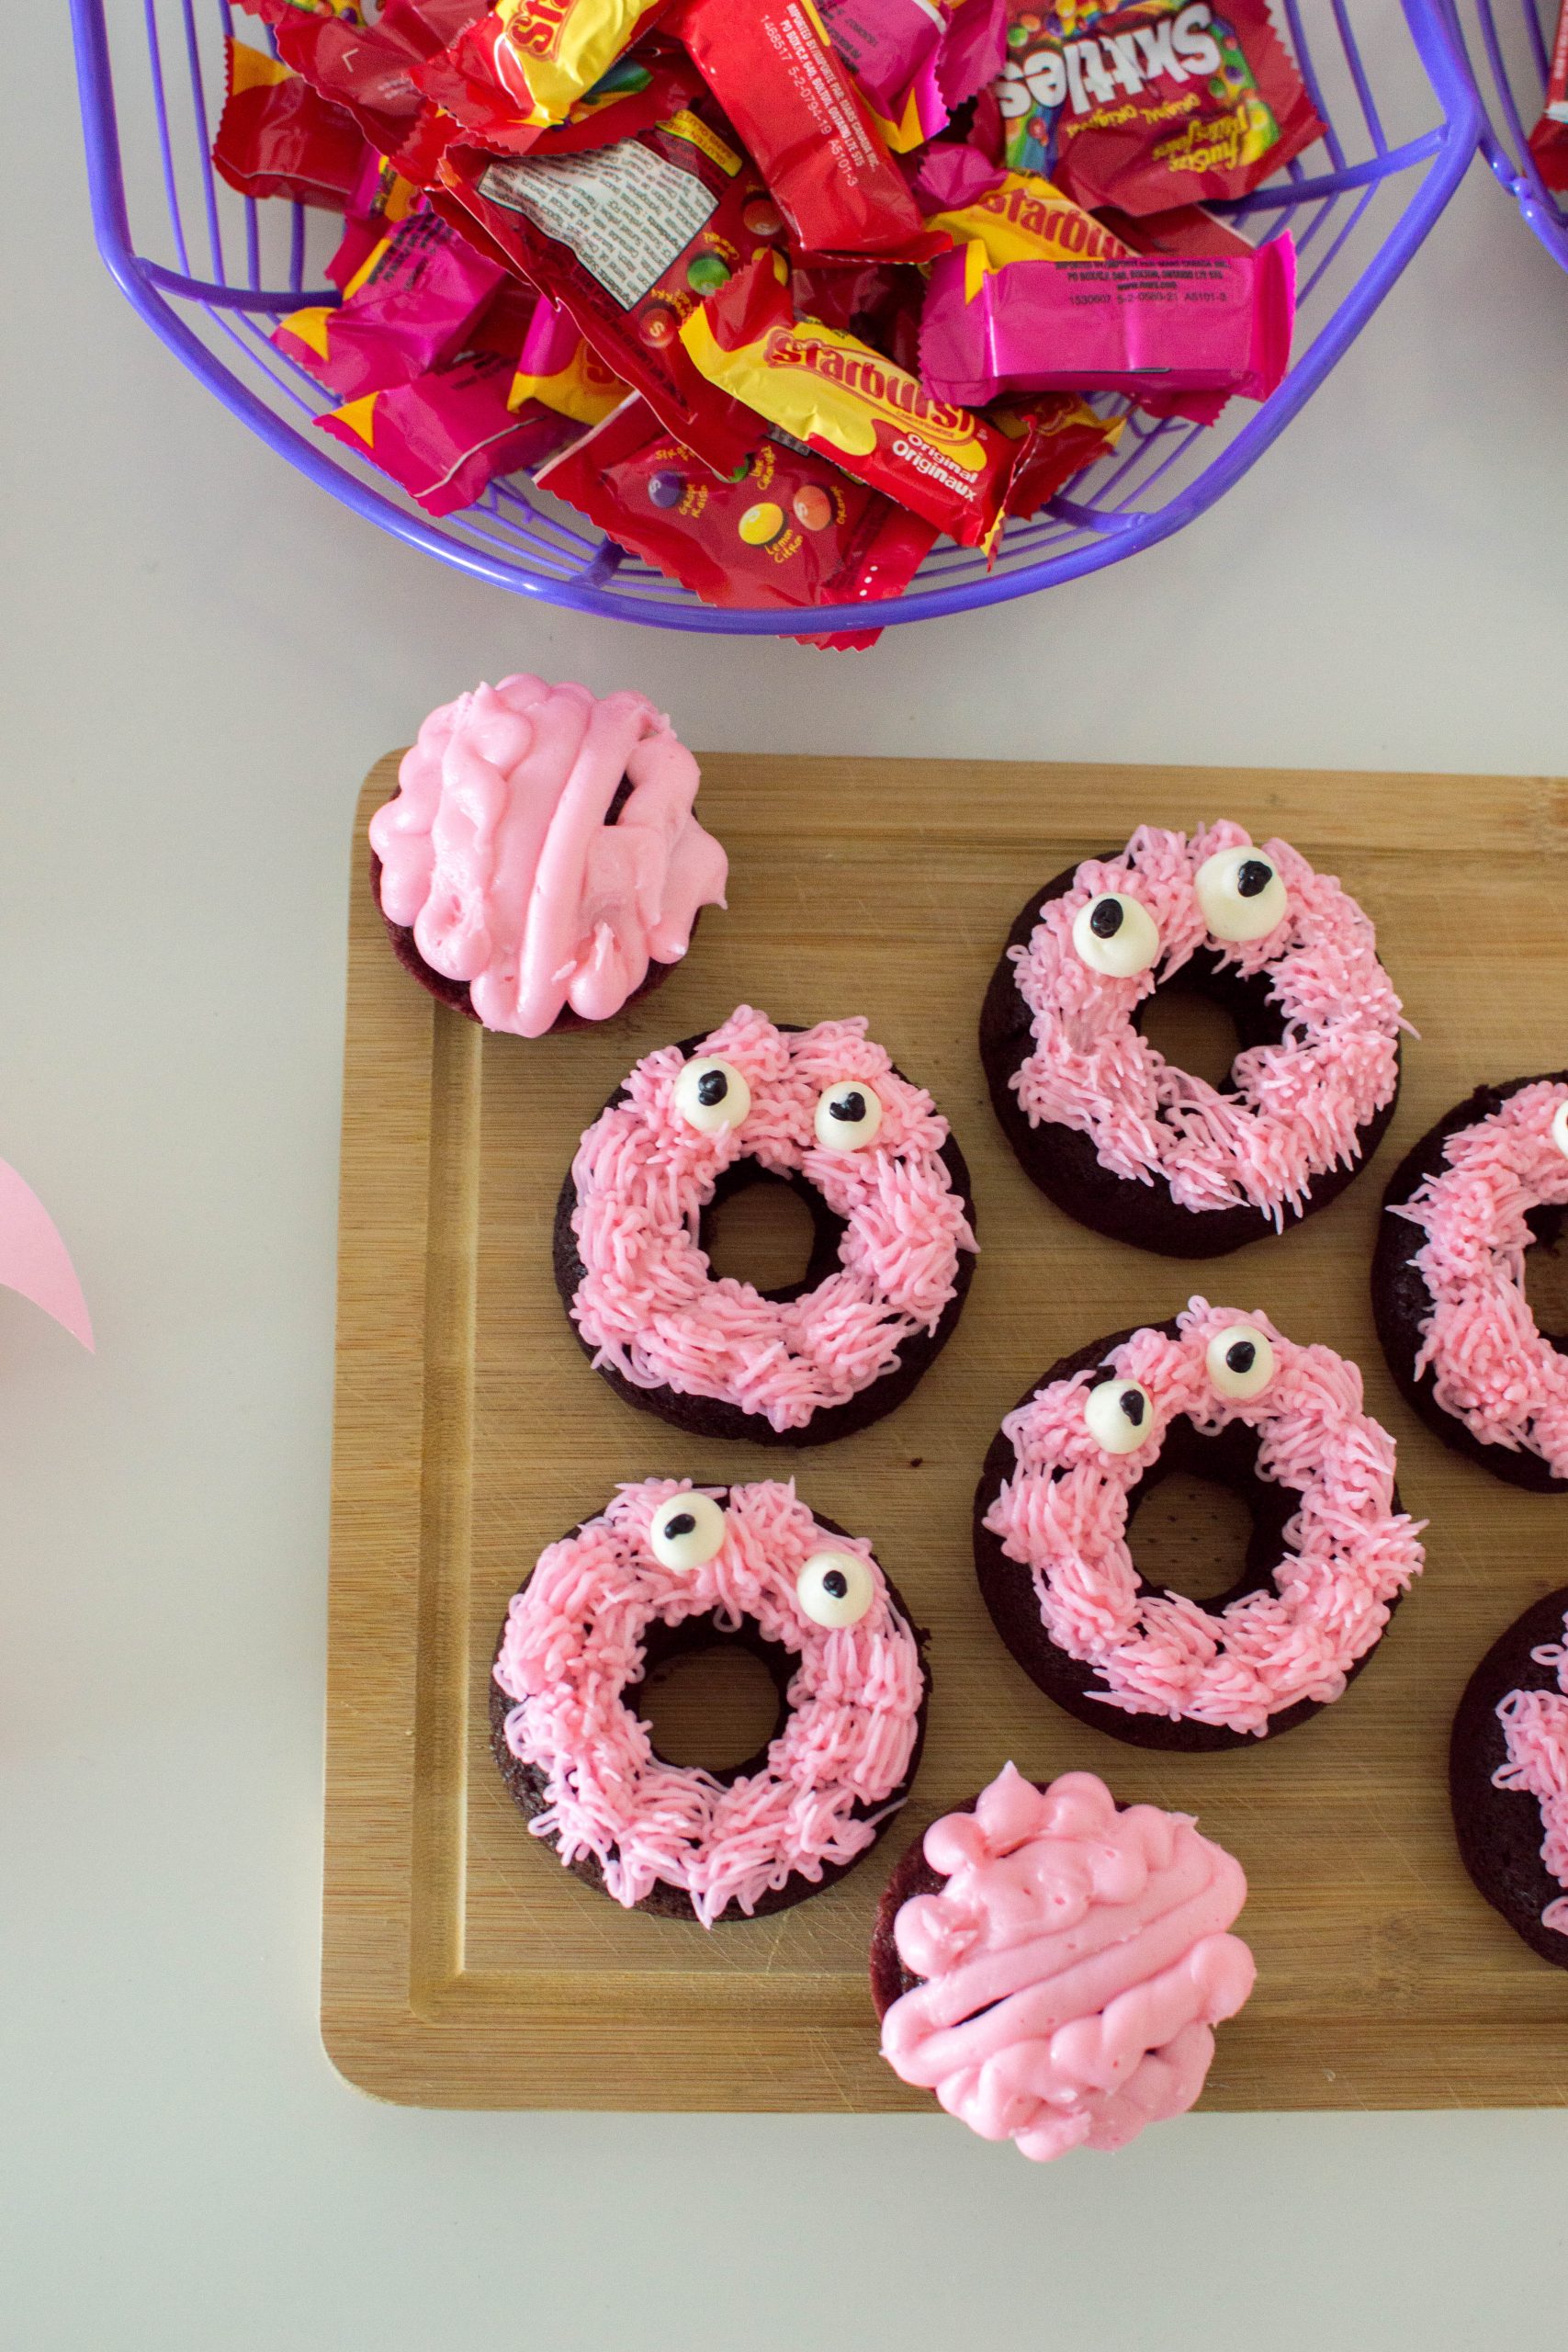 Need some Halloween dessert ideas? These Pink Monster Donuts for Halloween are absolutely delicious and completely homemade. They’re the perfect addition to any Halloween tablescape.